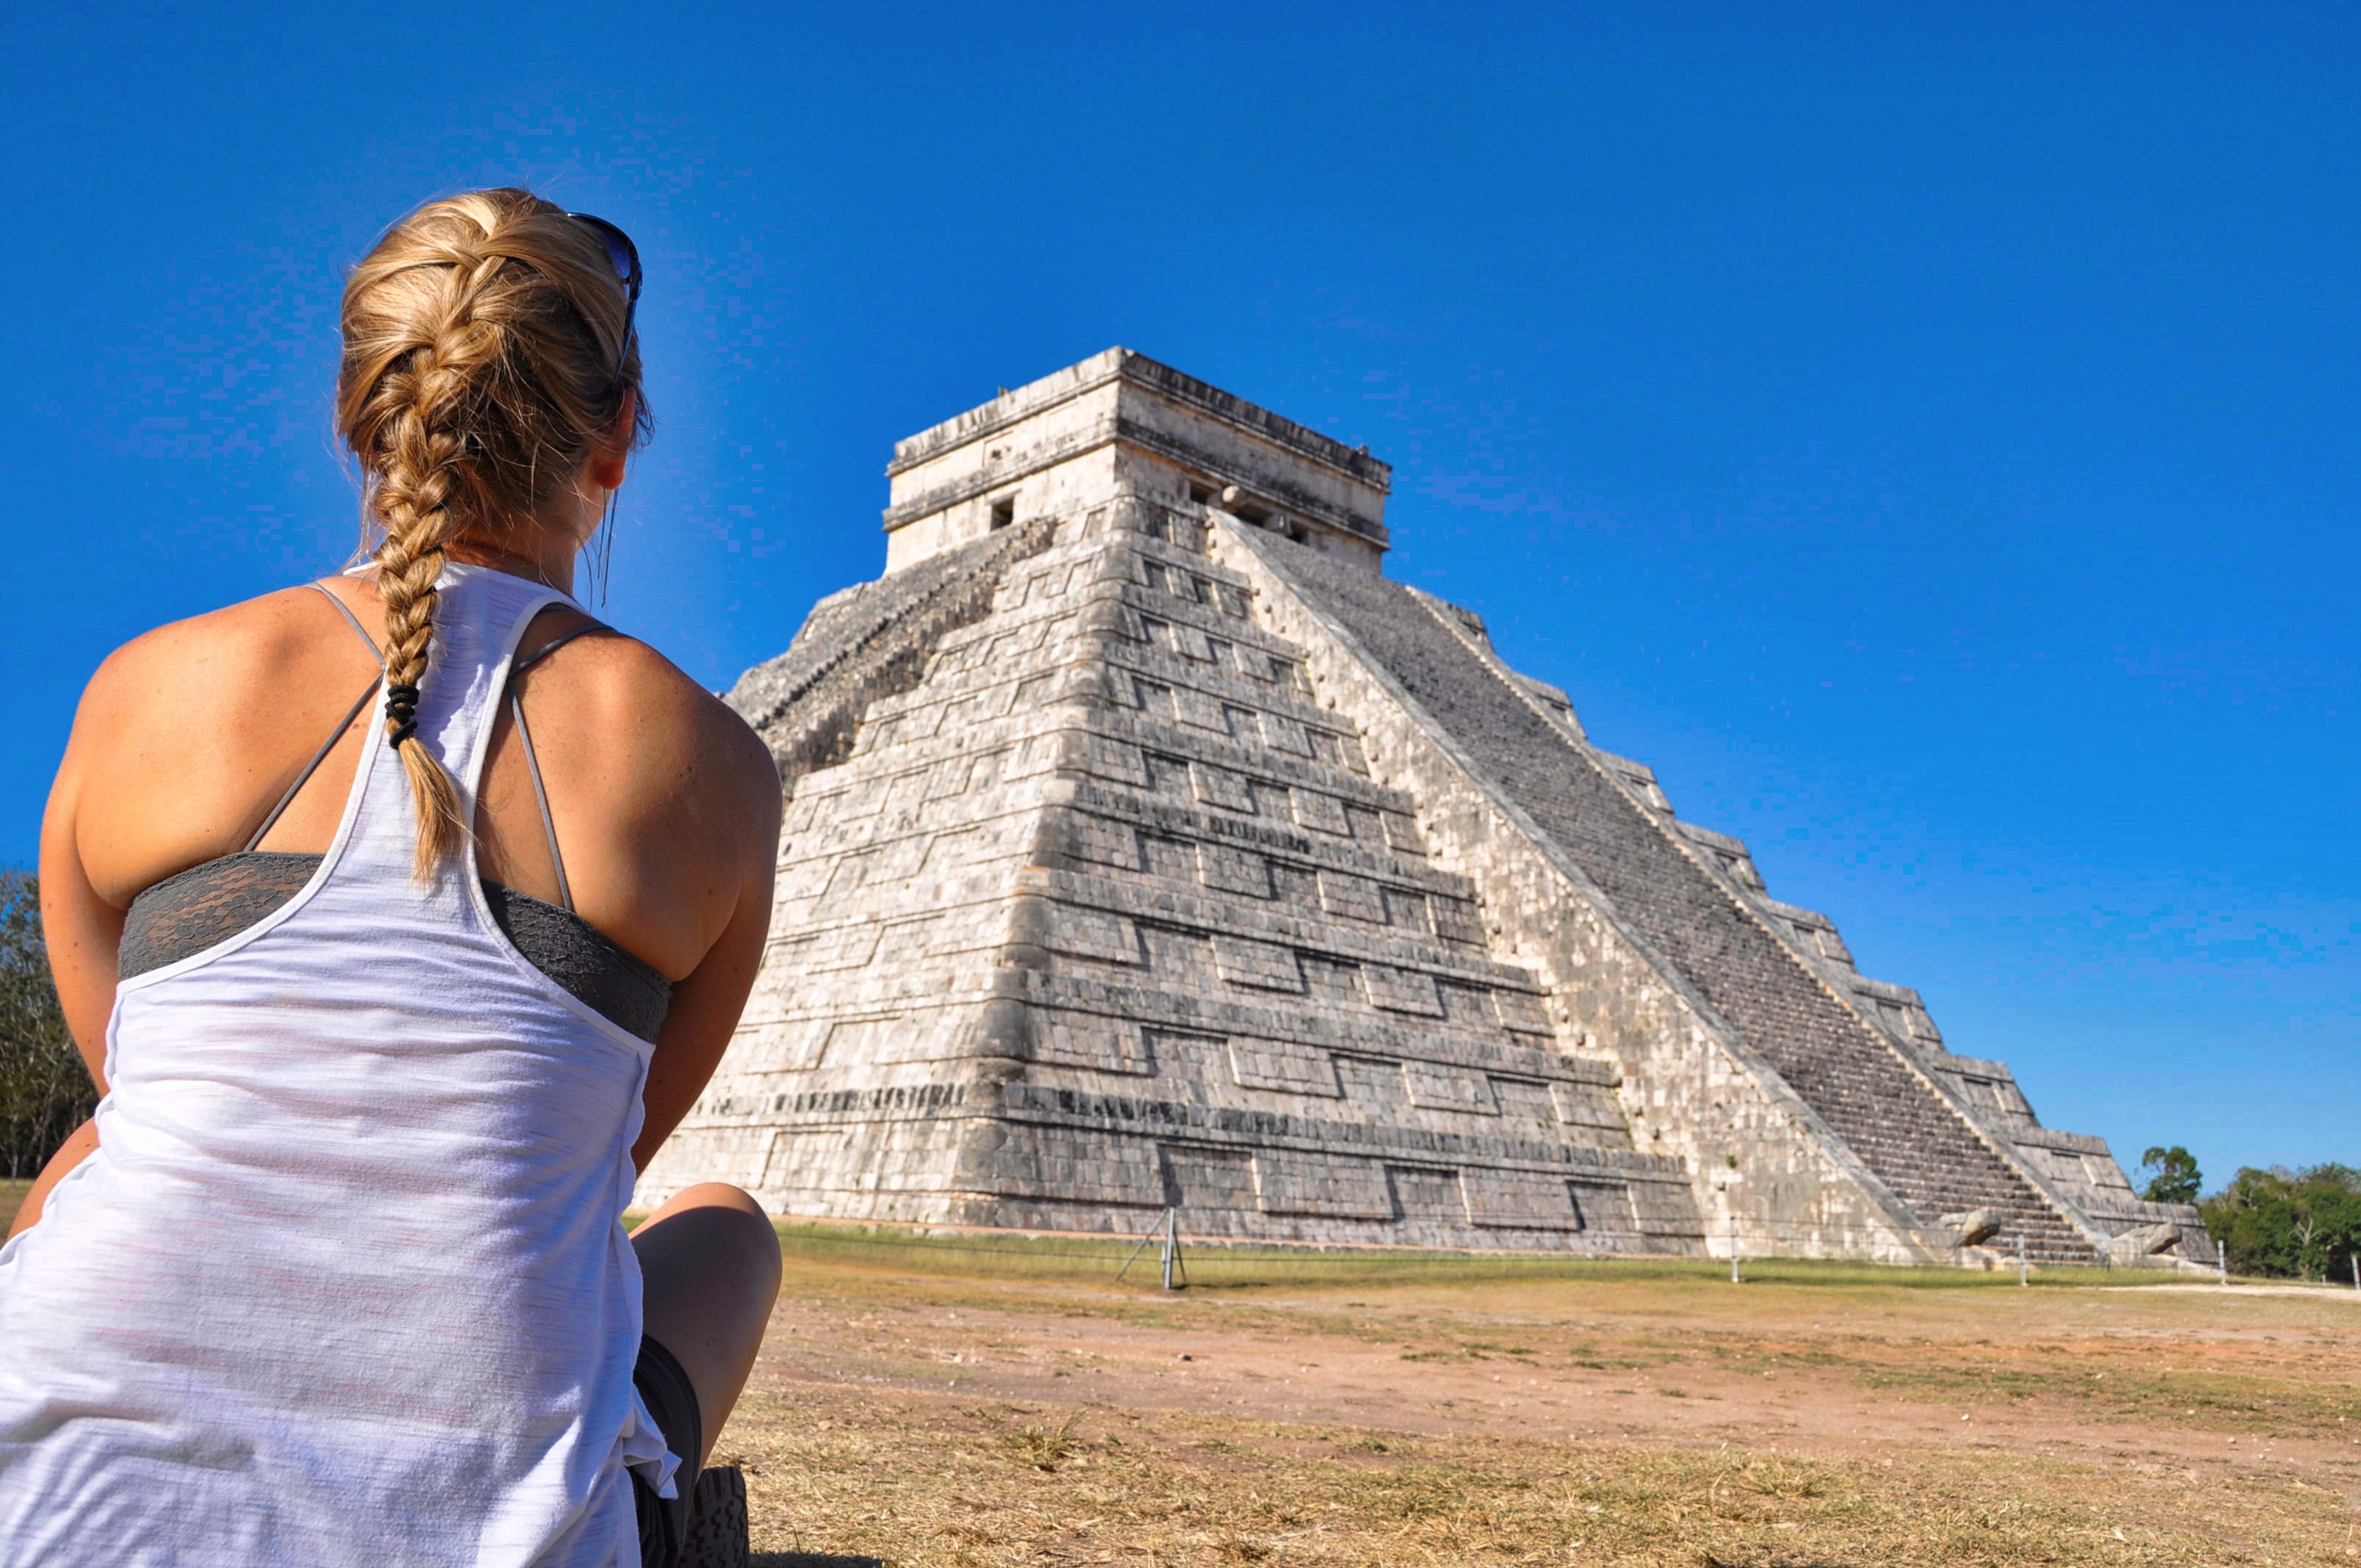 Two Travel The World - Chichen Itza: Maya Temples in the Yucatan